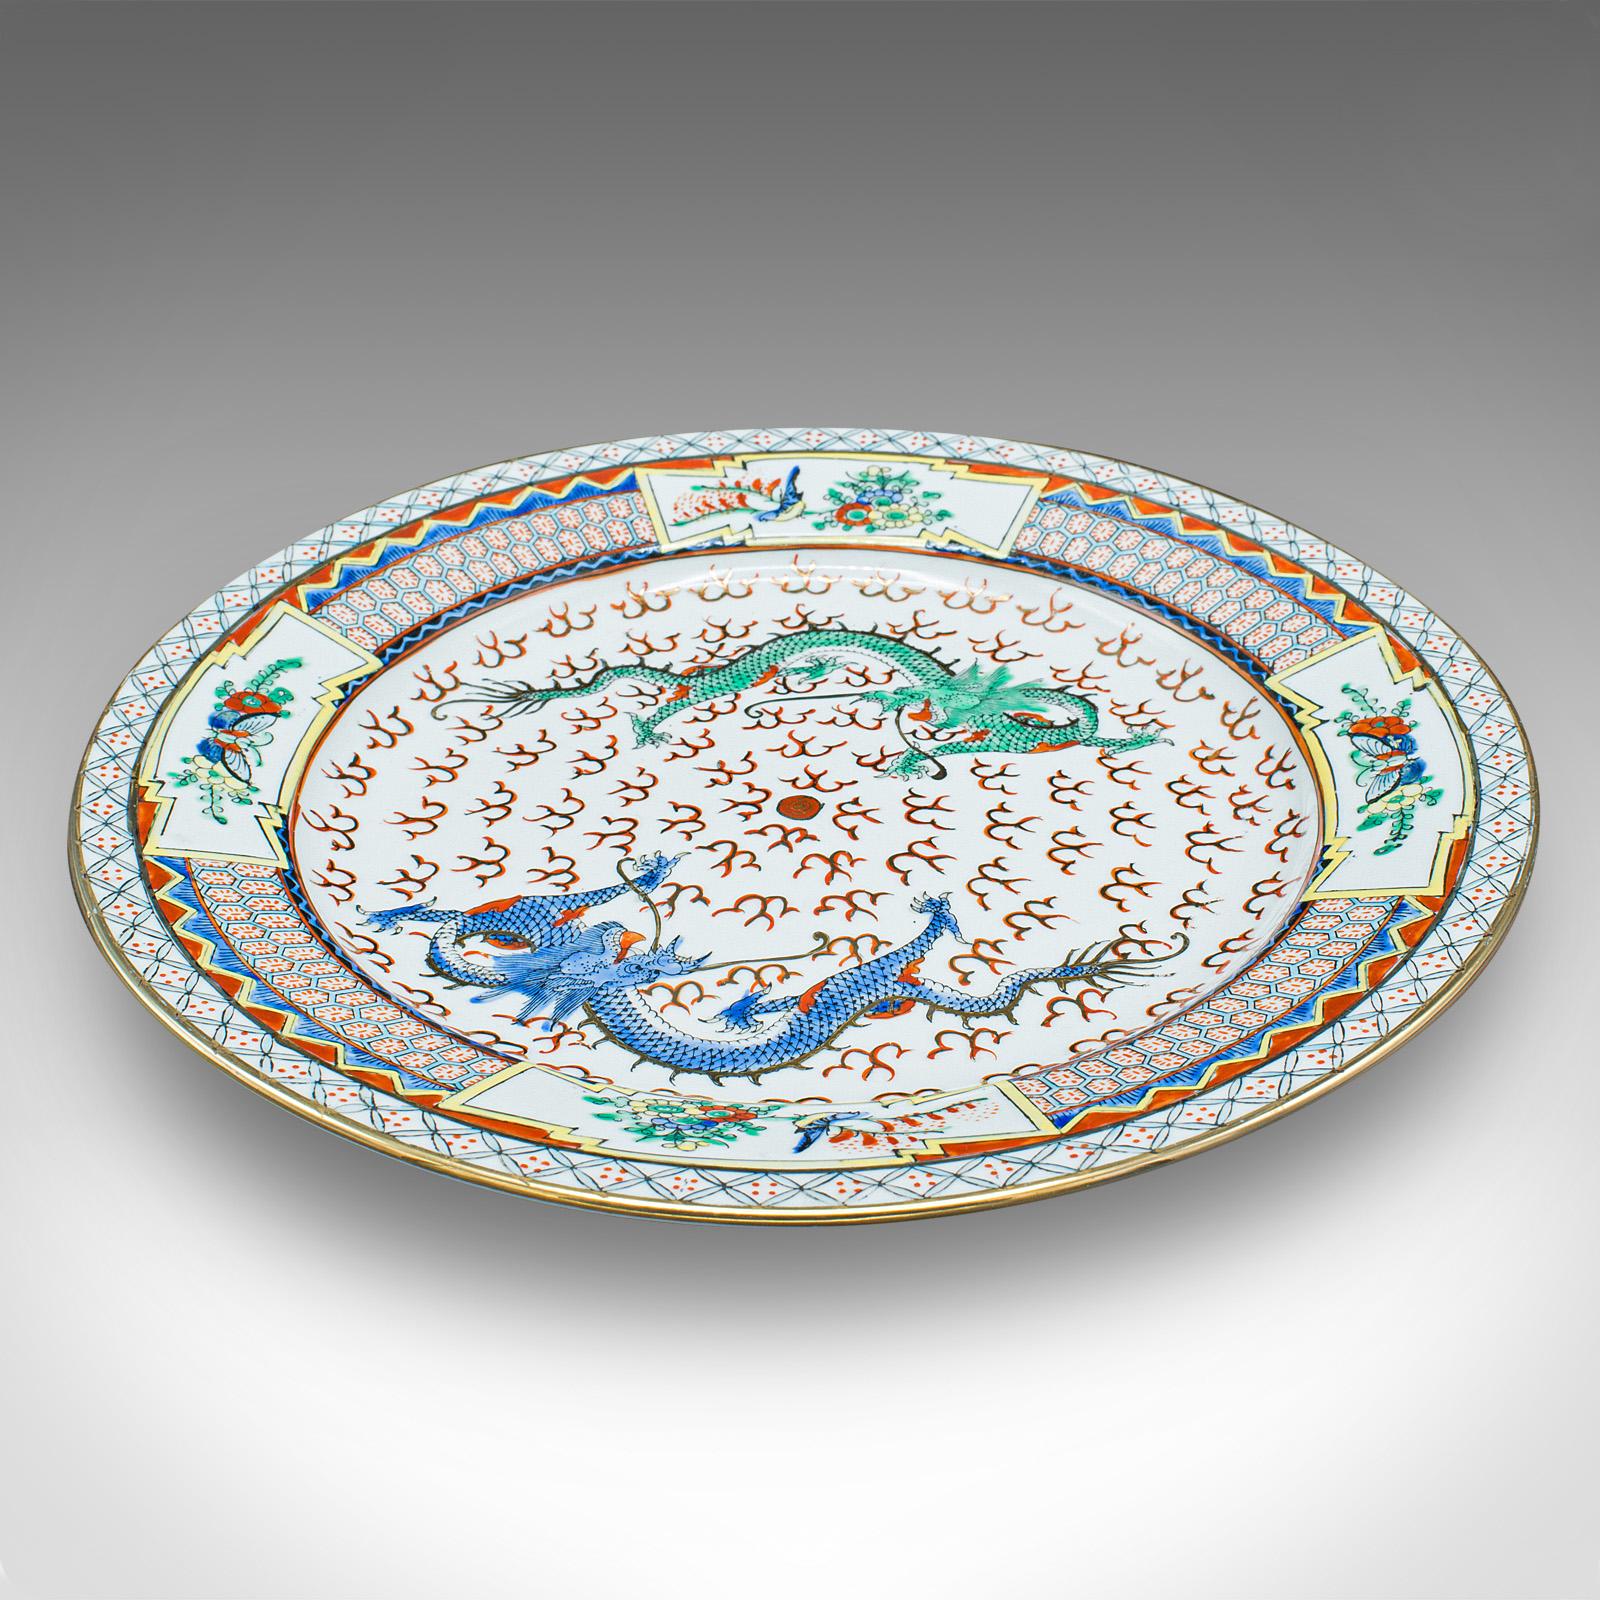 This is a vintage display plate. A Chinese, ceramic serving dish in Art Deco taste, dating to the early 20th century, circa 1930.

Profusely decorated with dragons and fine pattern detail.
Displays a desirable aged patina and in good